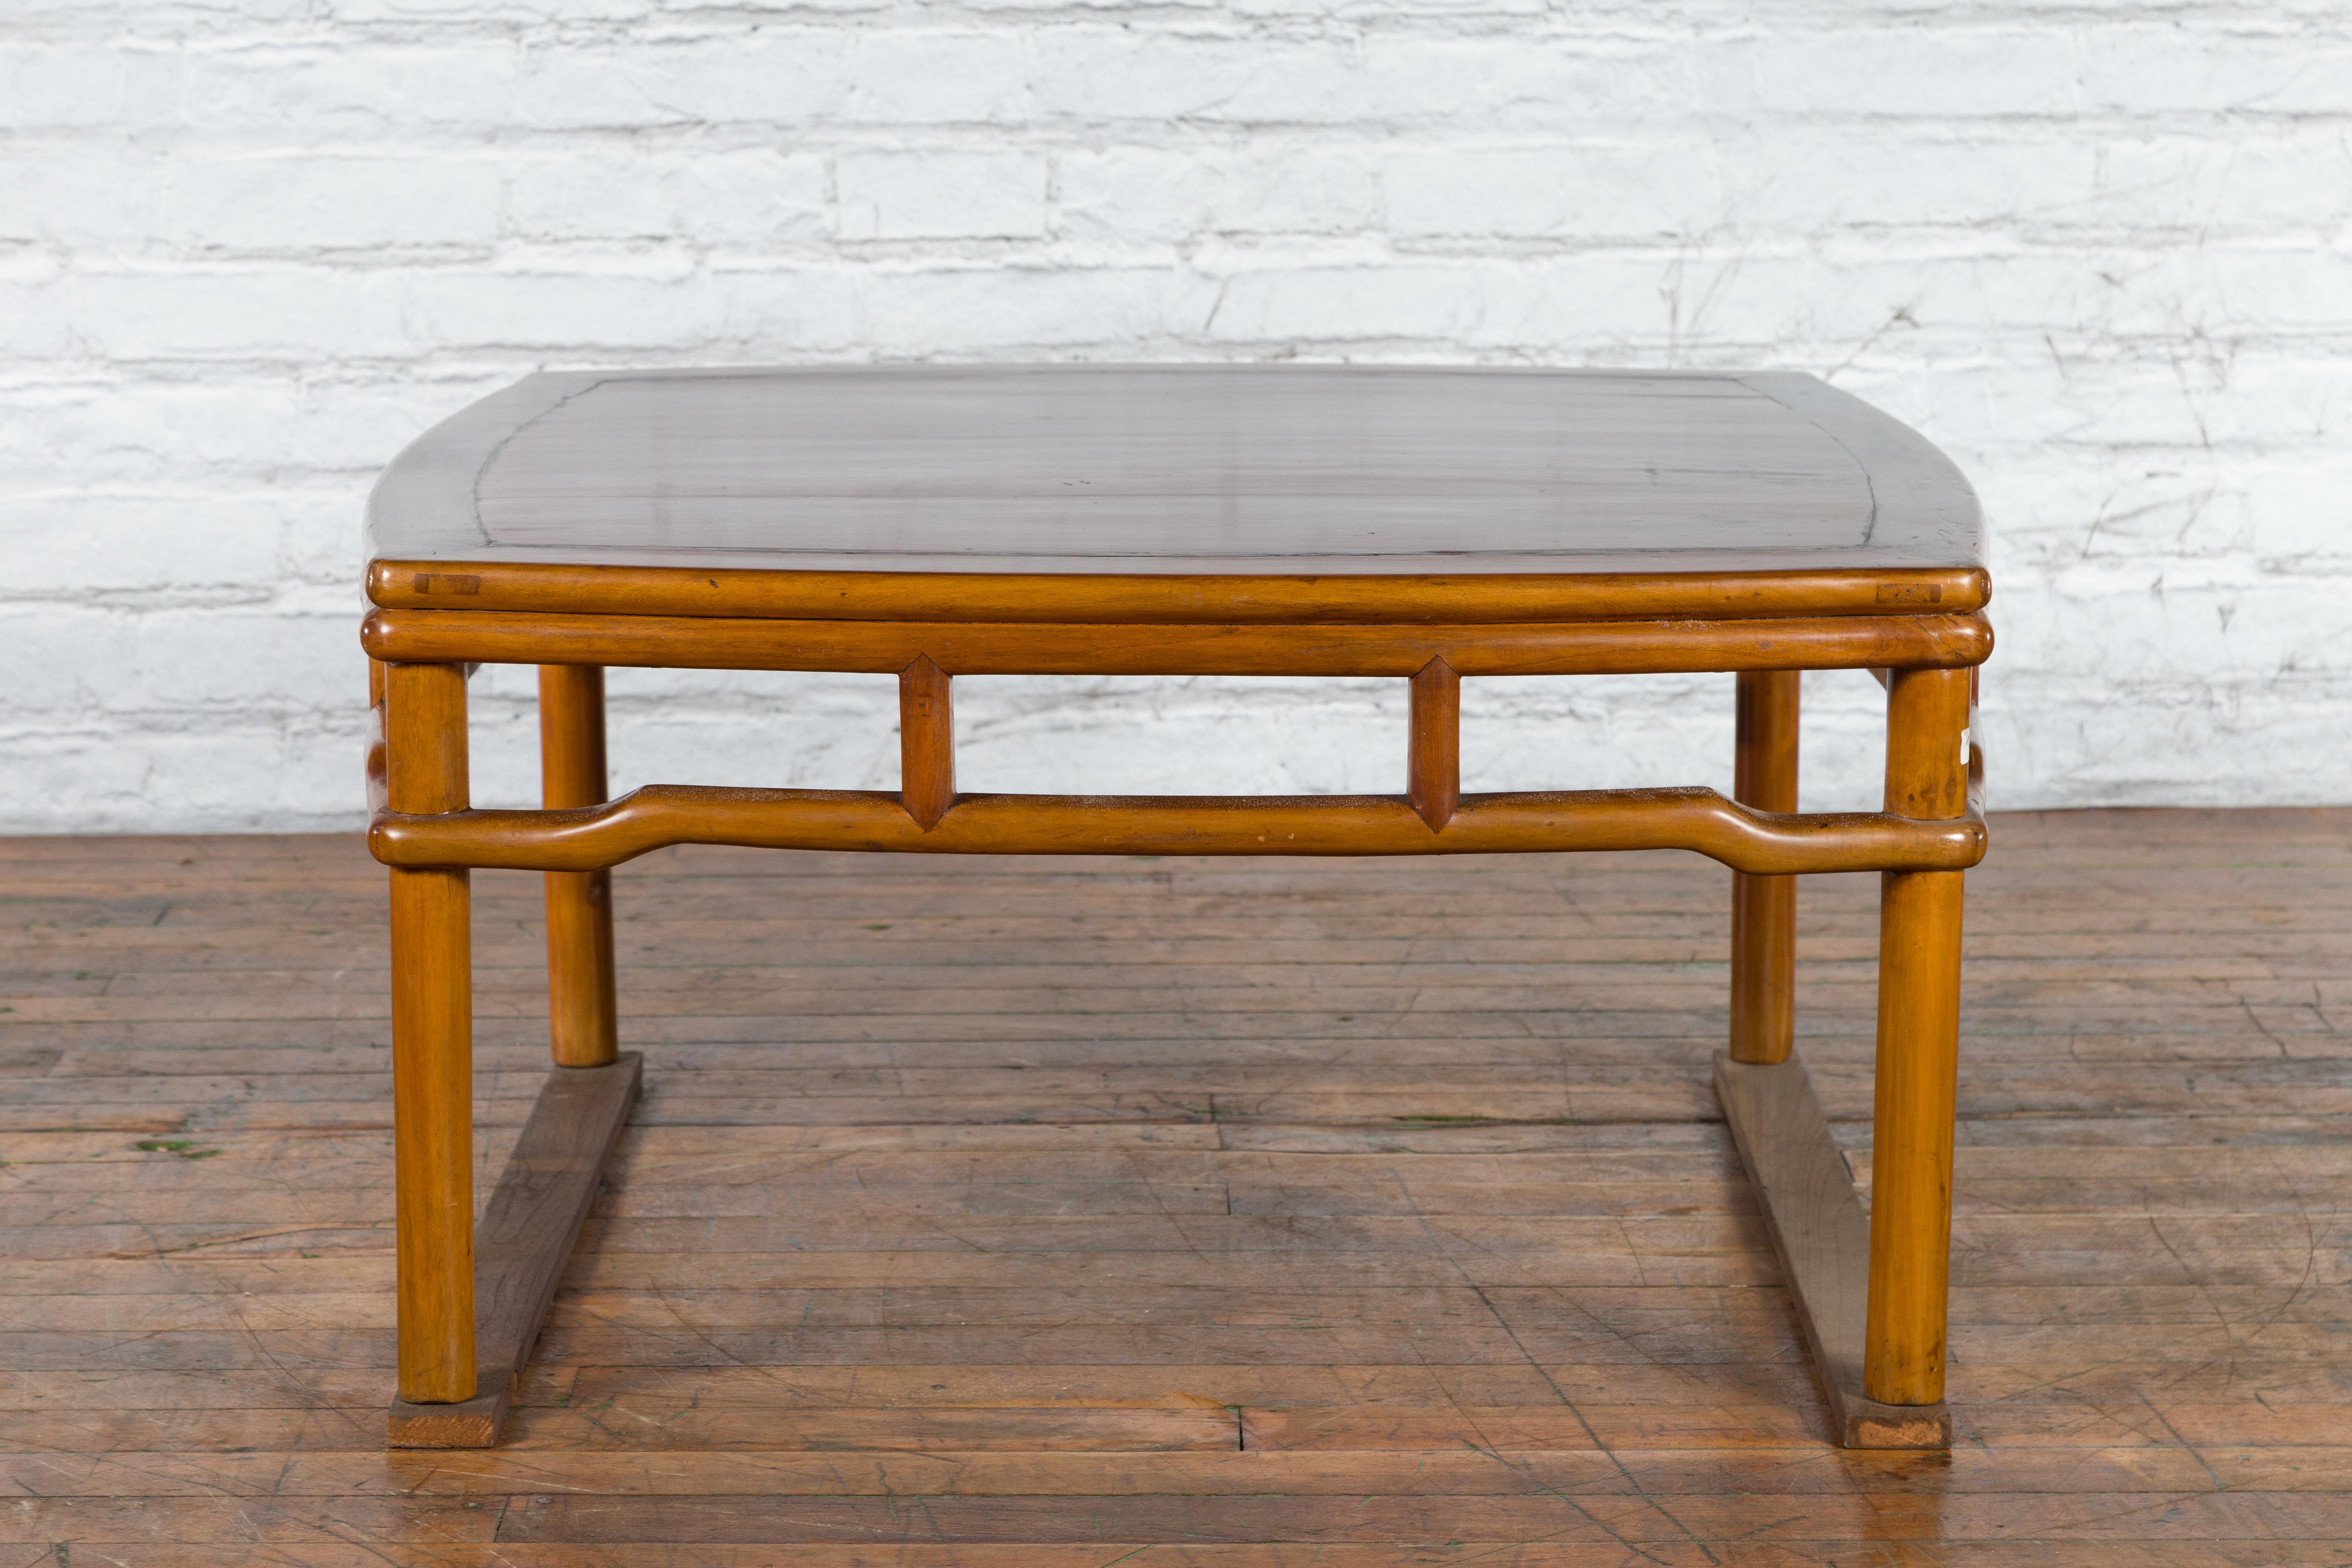 A Chinese Qing Dynasty period antique coffee table from the 19th century, with square top, pillar strut motifs, humpback stretchers and cylindrical legs. Created in China during the Qing Dynasty in the 19th century, this wooden coffee table features